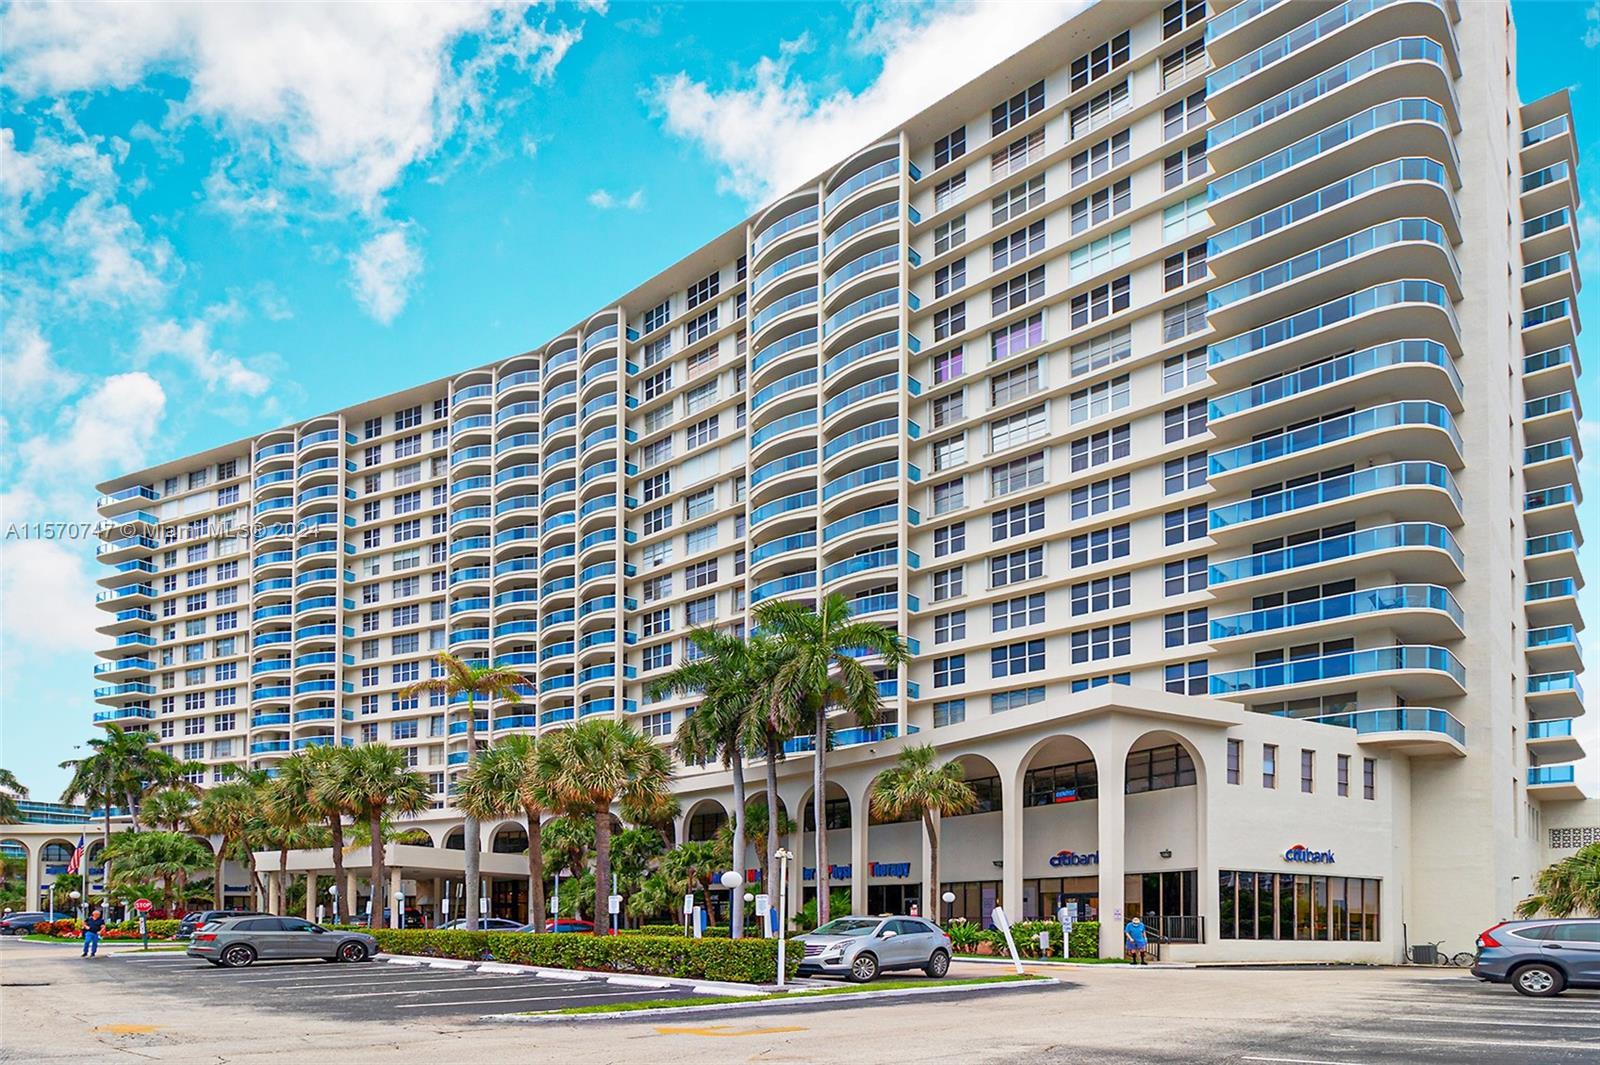 Photo of 3800 S Ocean Dr #1718 in Hollywood, FL